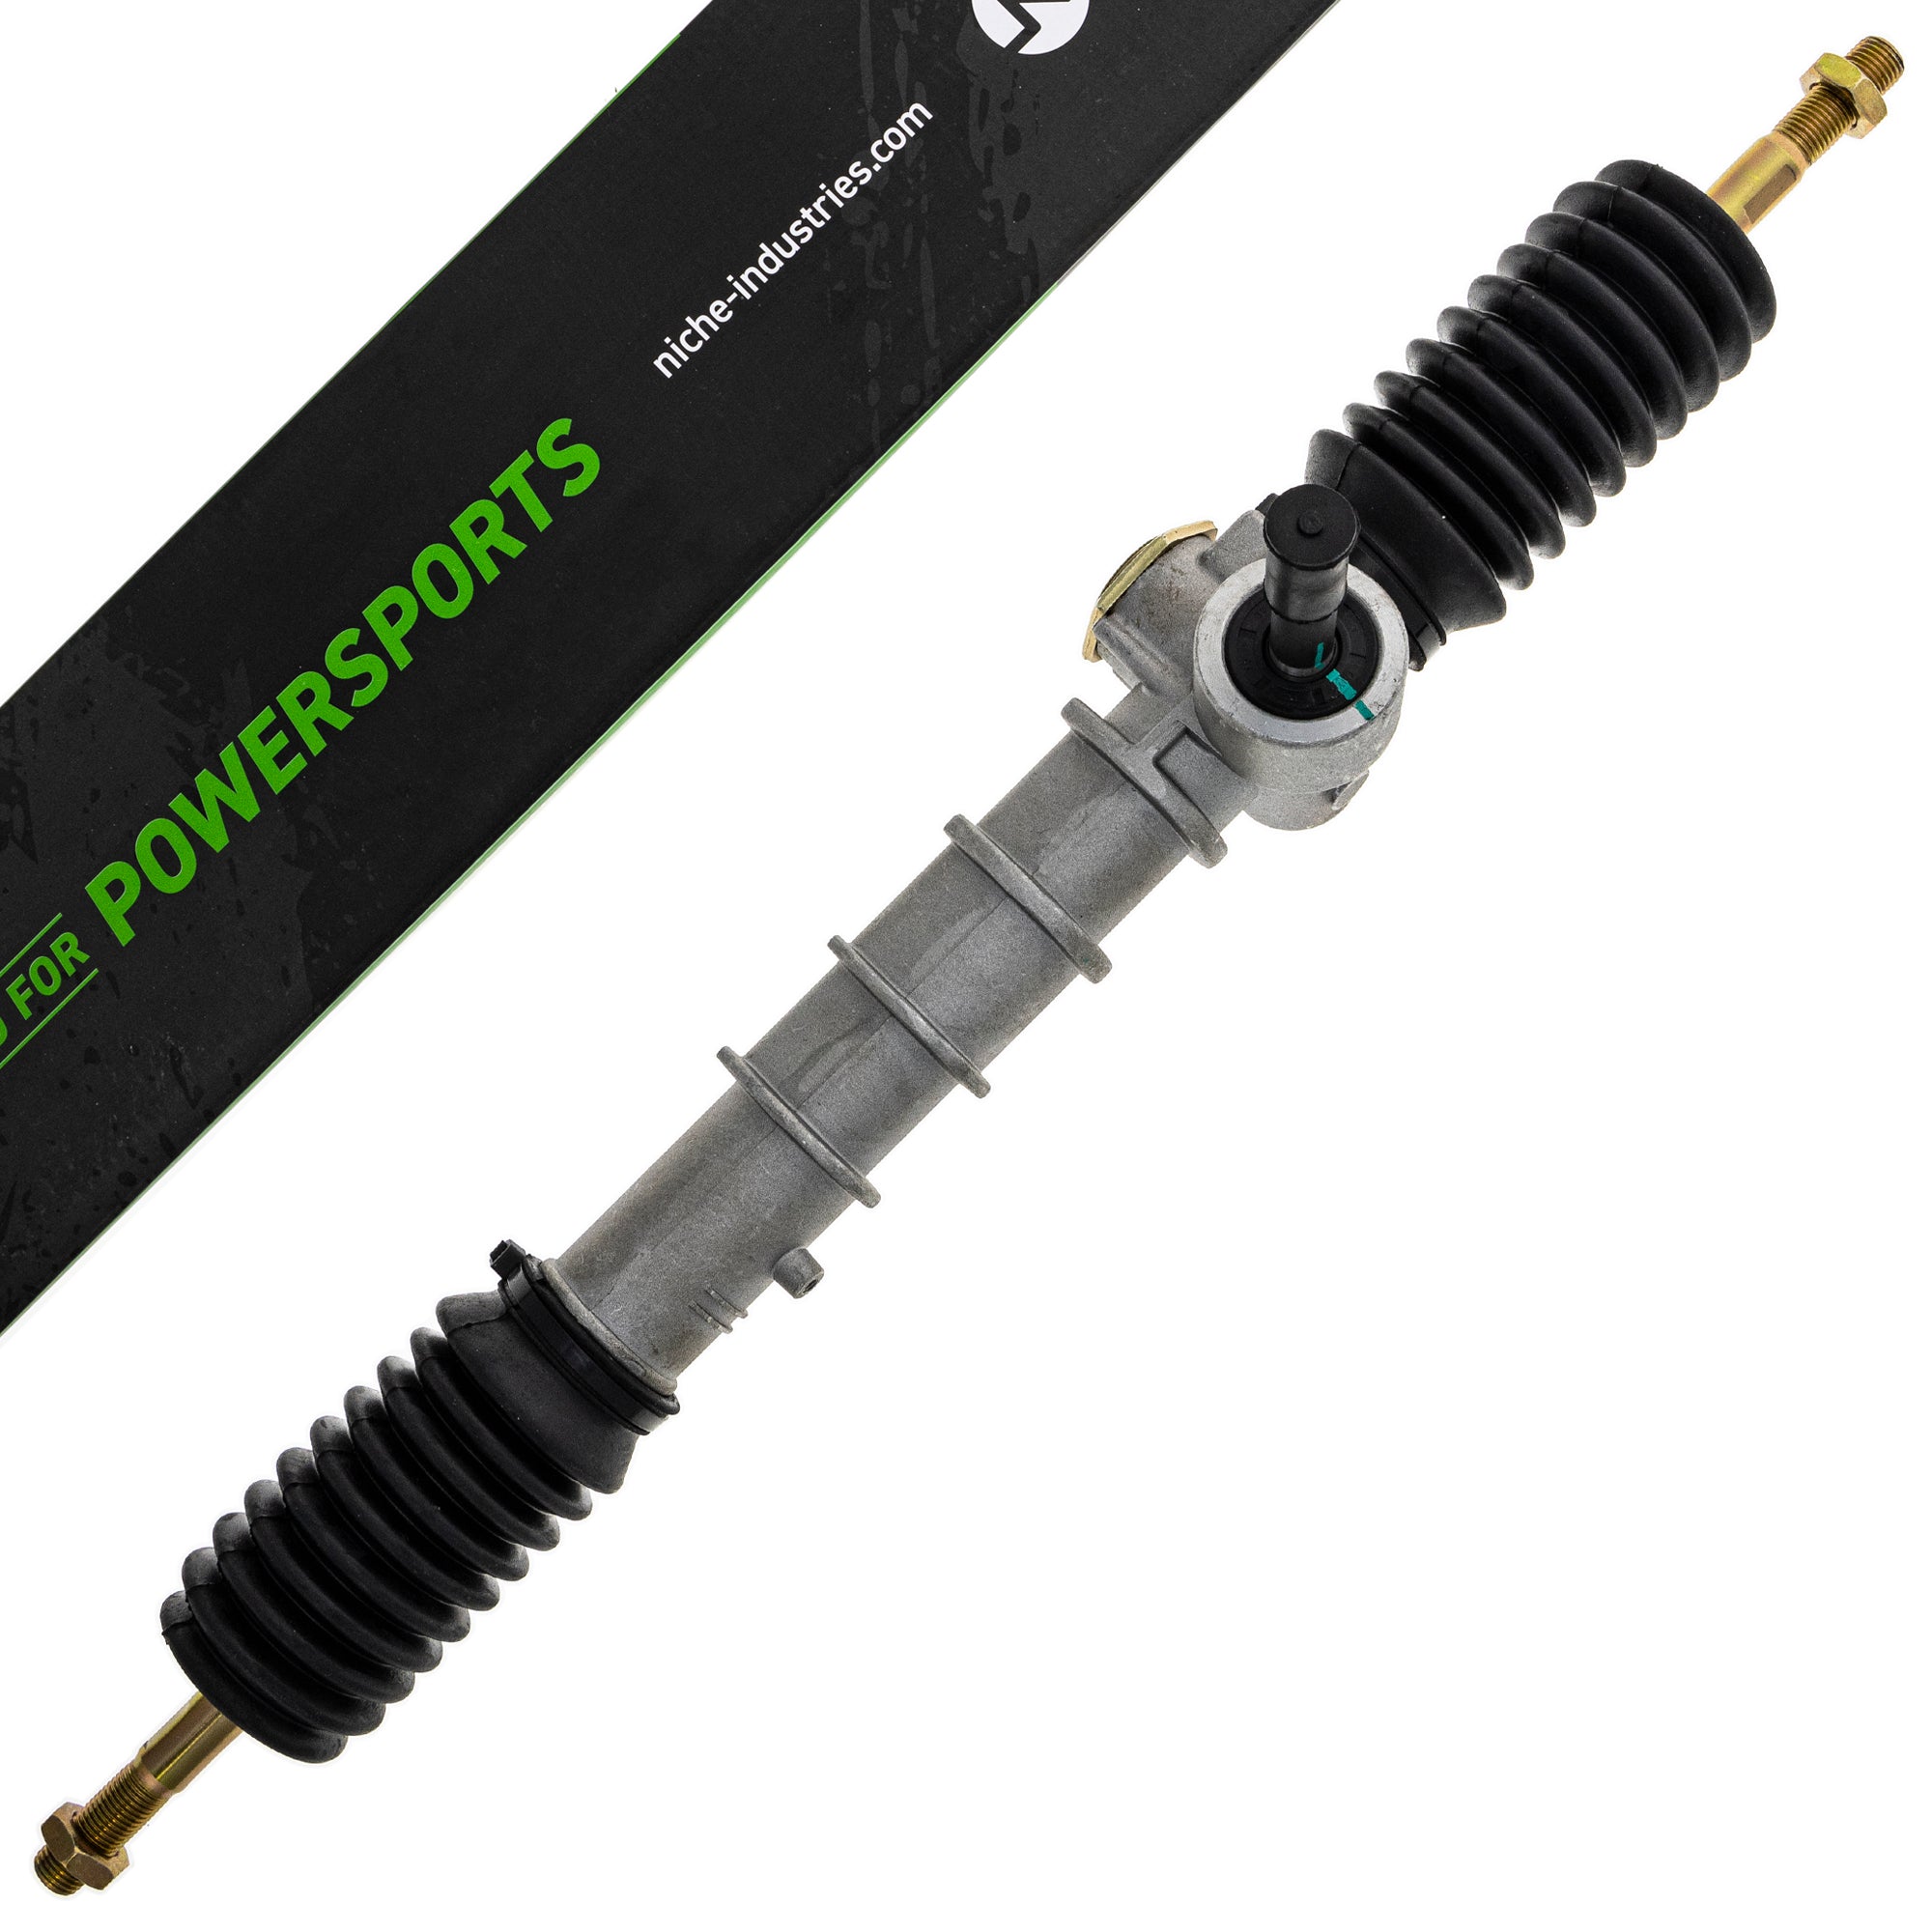 Steering Rack Assembly 519-CSR2225A For Kawasaki 39191-0022 39191-0017 39191-0014 39191-0001